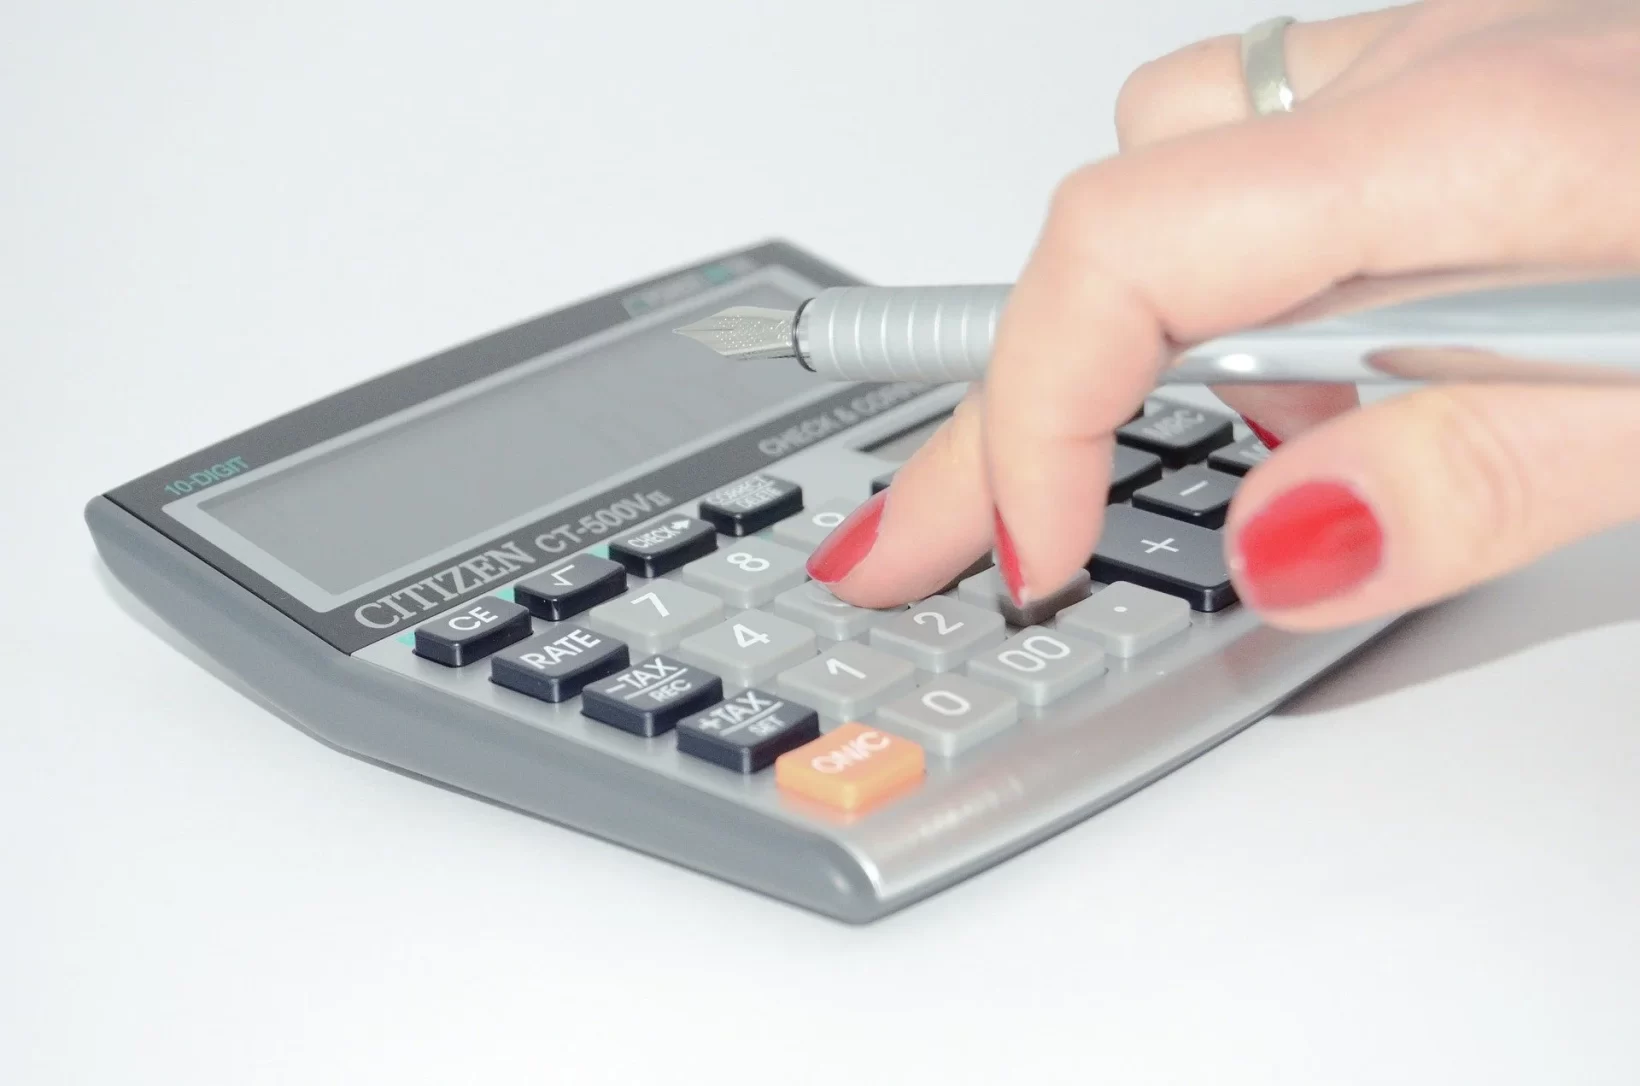 The image with a white background shows a calculator and the hand of a woman working on it.